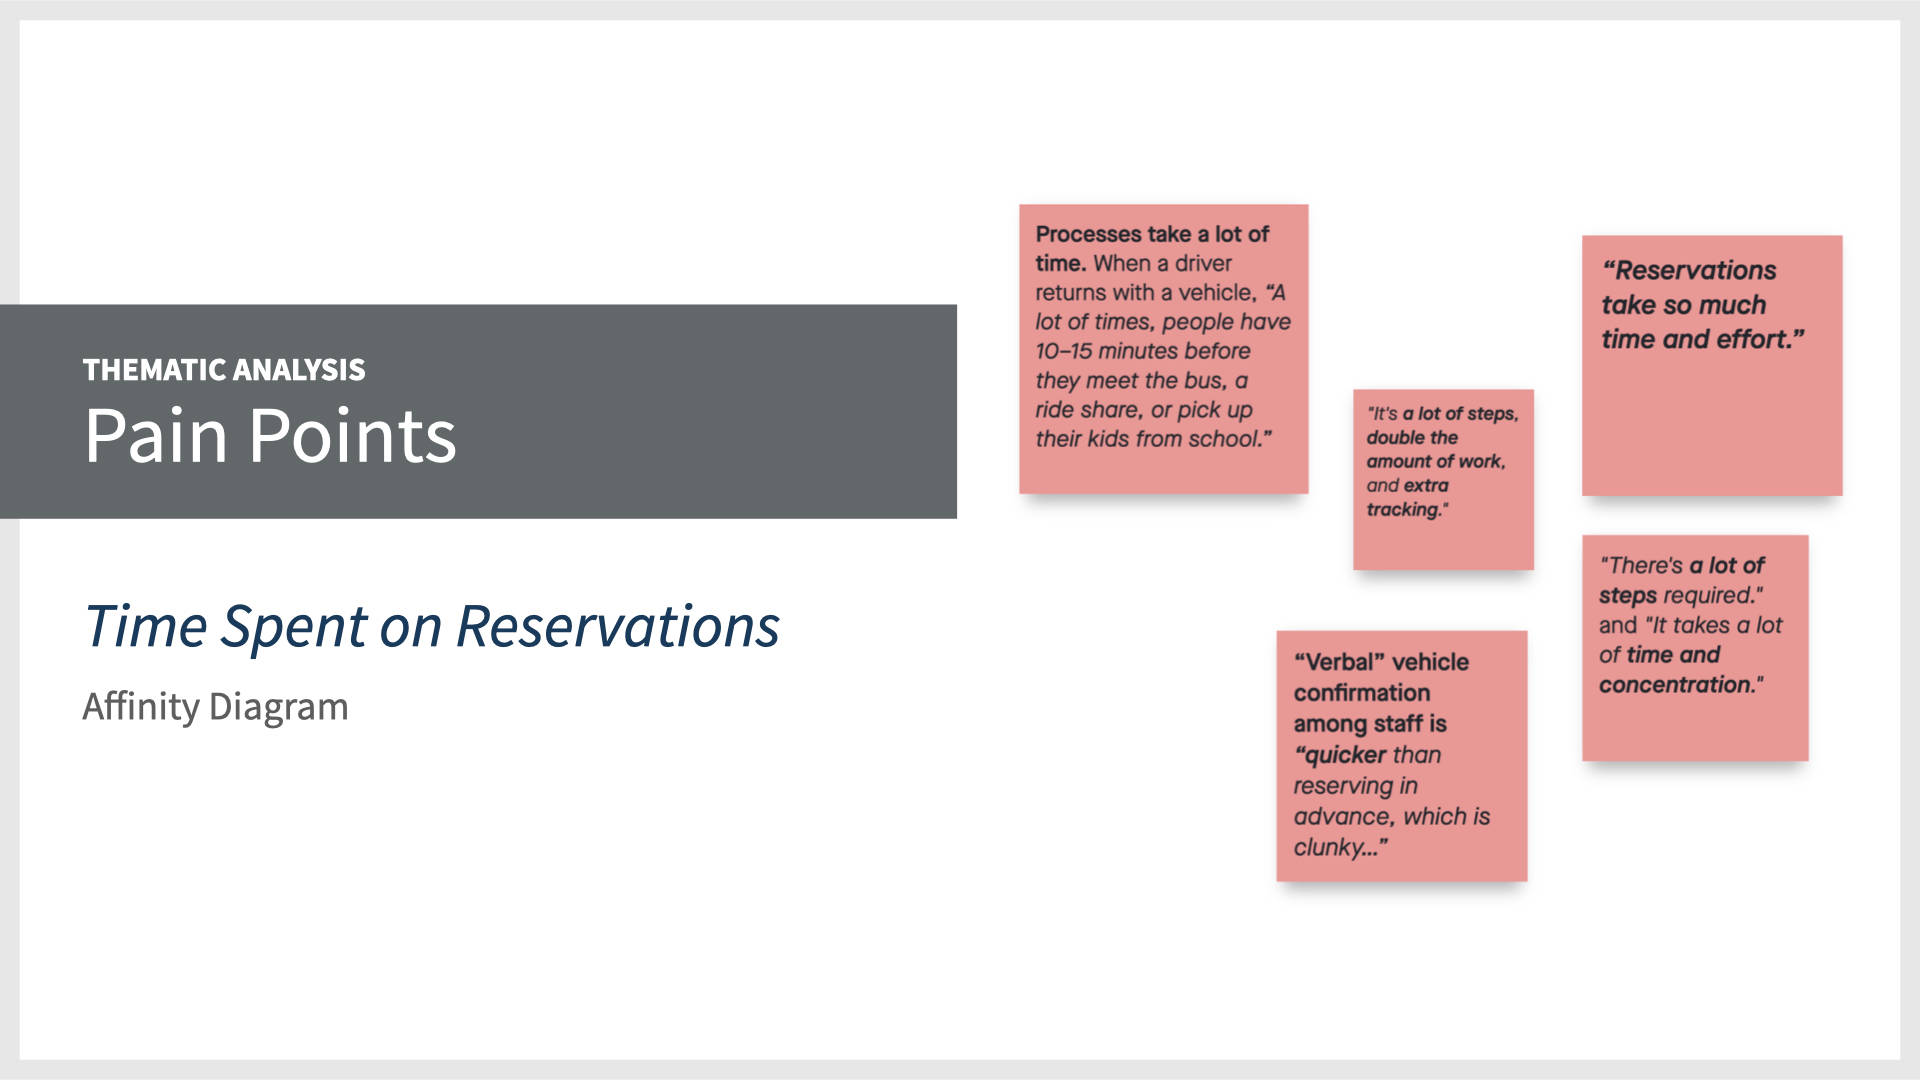 Thematic Analysis: Pain Points with Time Spent on Reservations